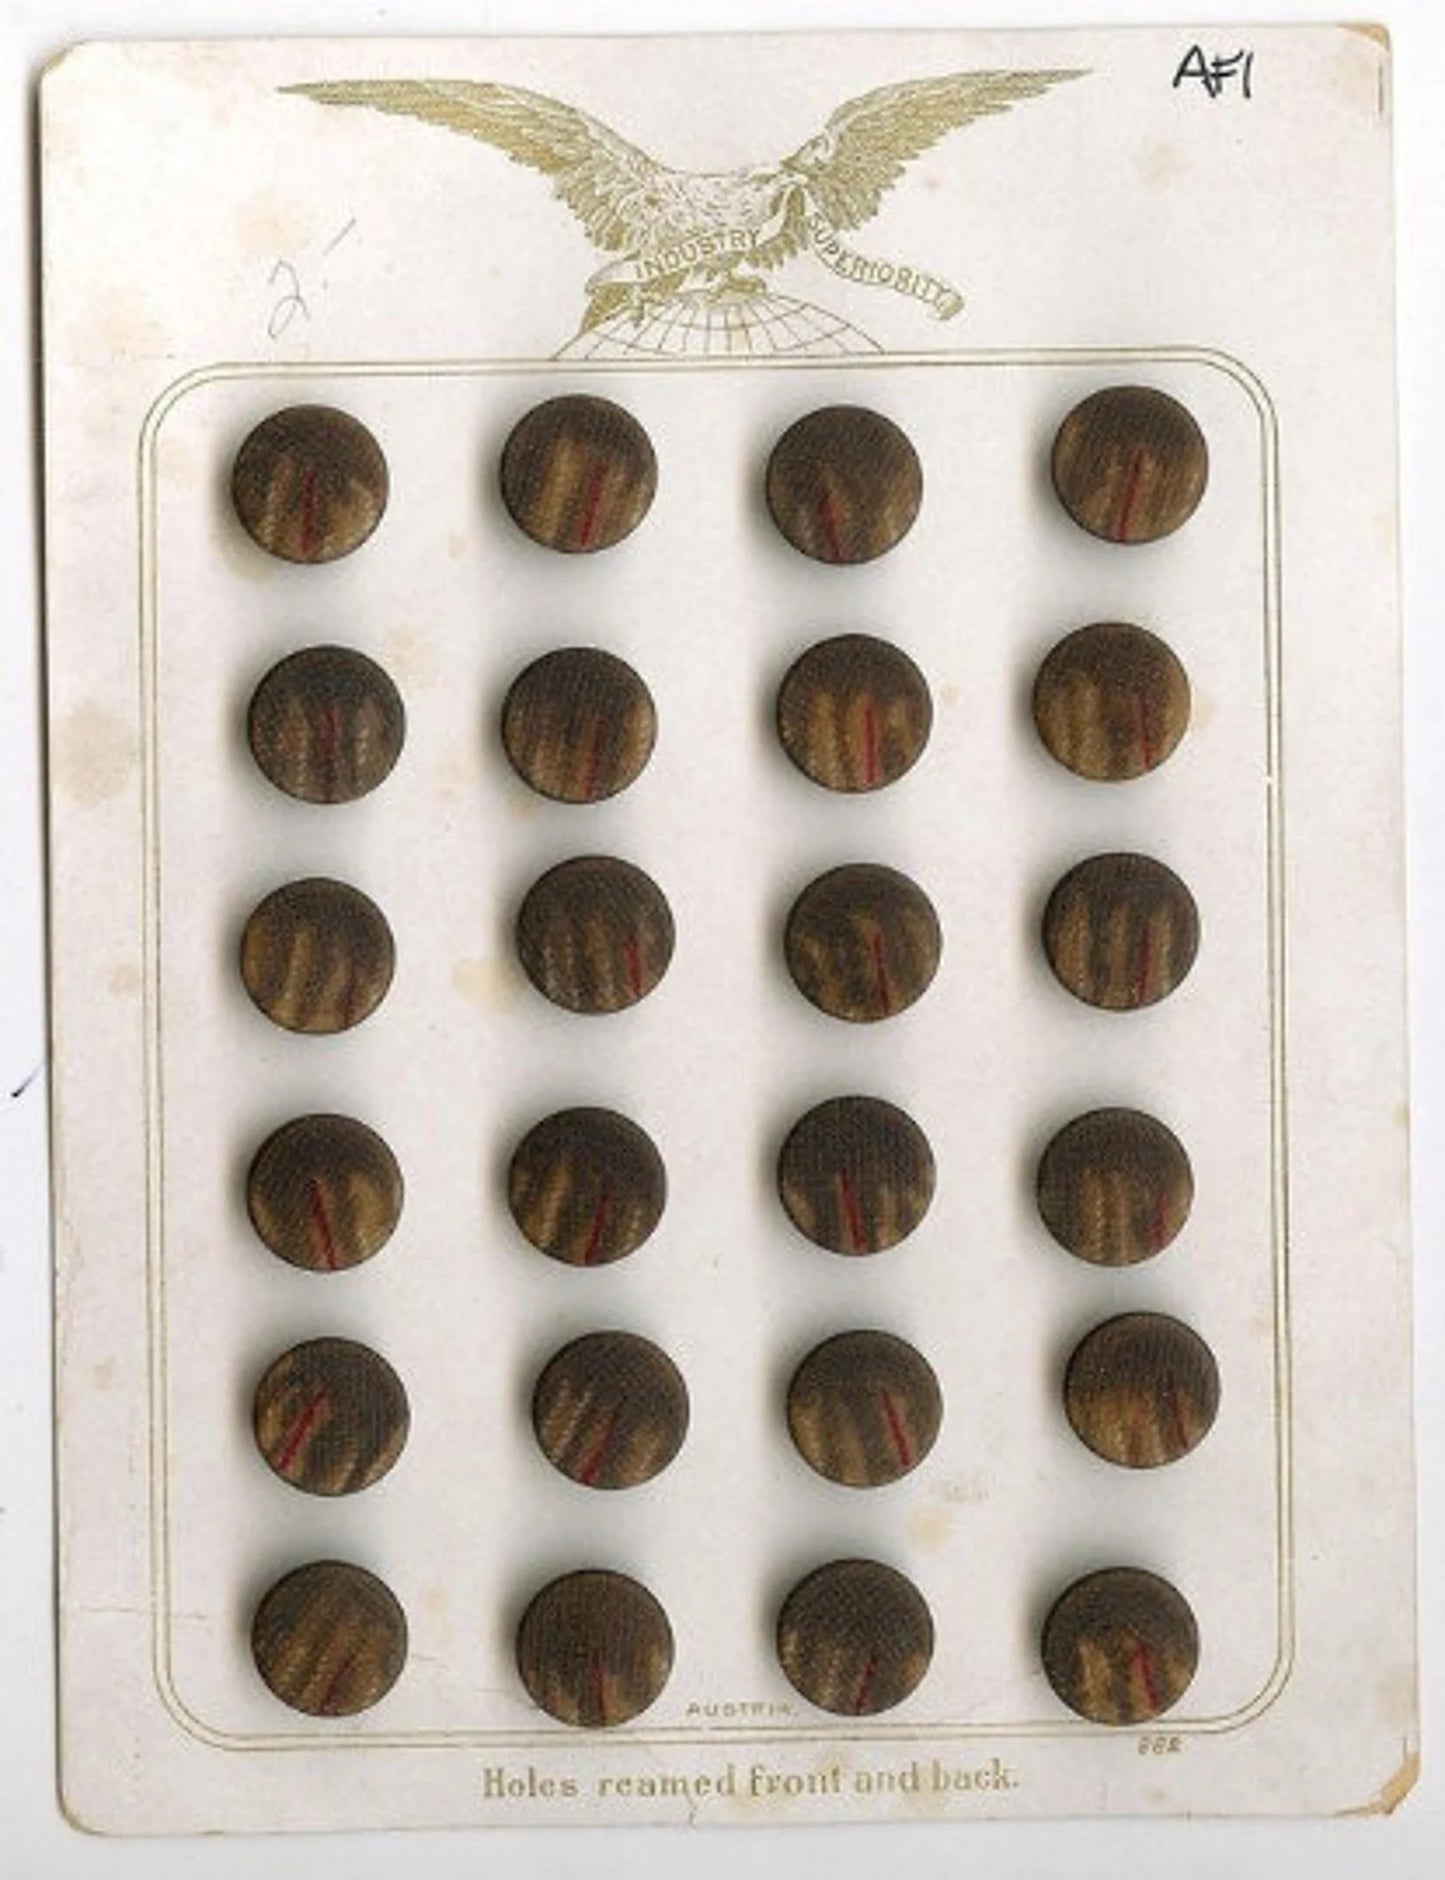 1800s/1900s Buttons, Antique Victorian Shank Buttons, 9/16", Set of 37, Brown Red, Golden Eagle, On Card, Made in Austria, Beautiful